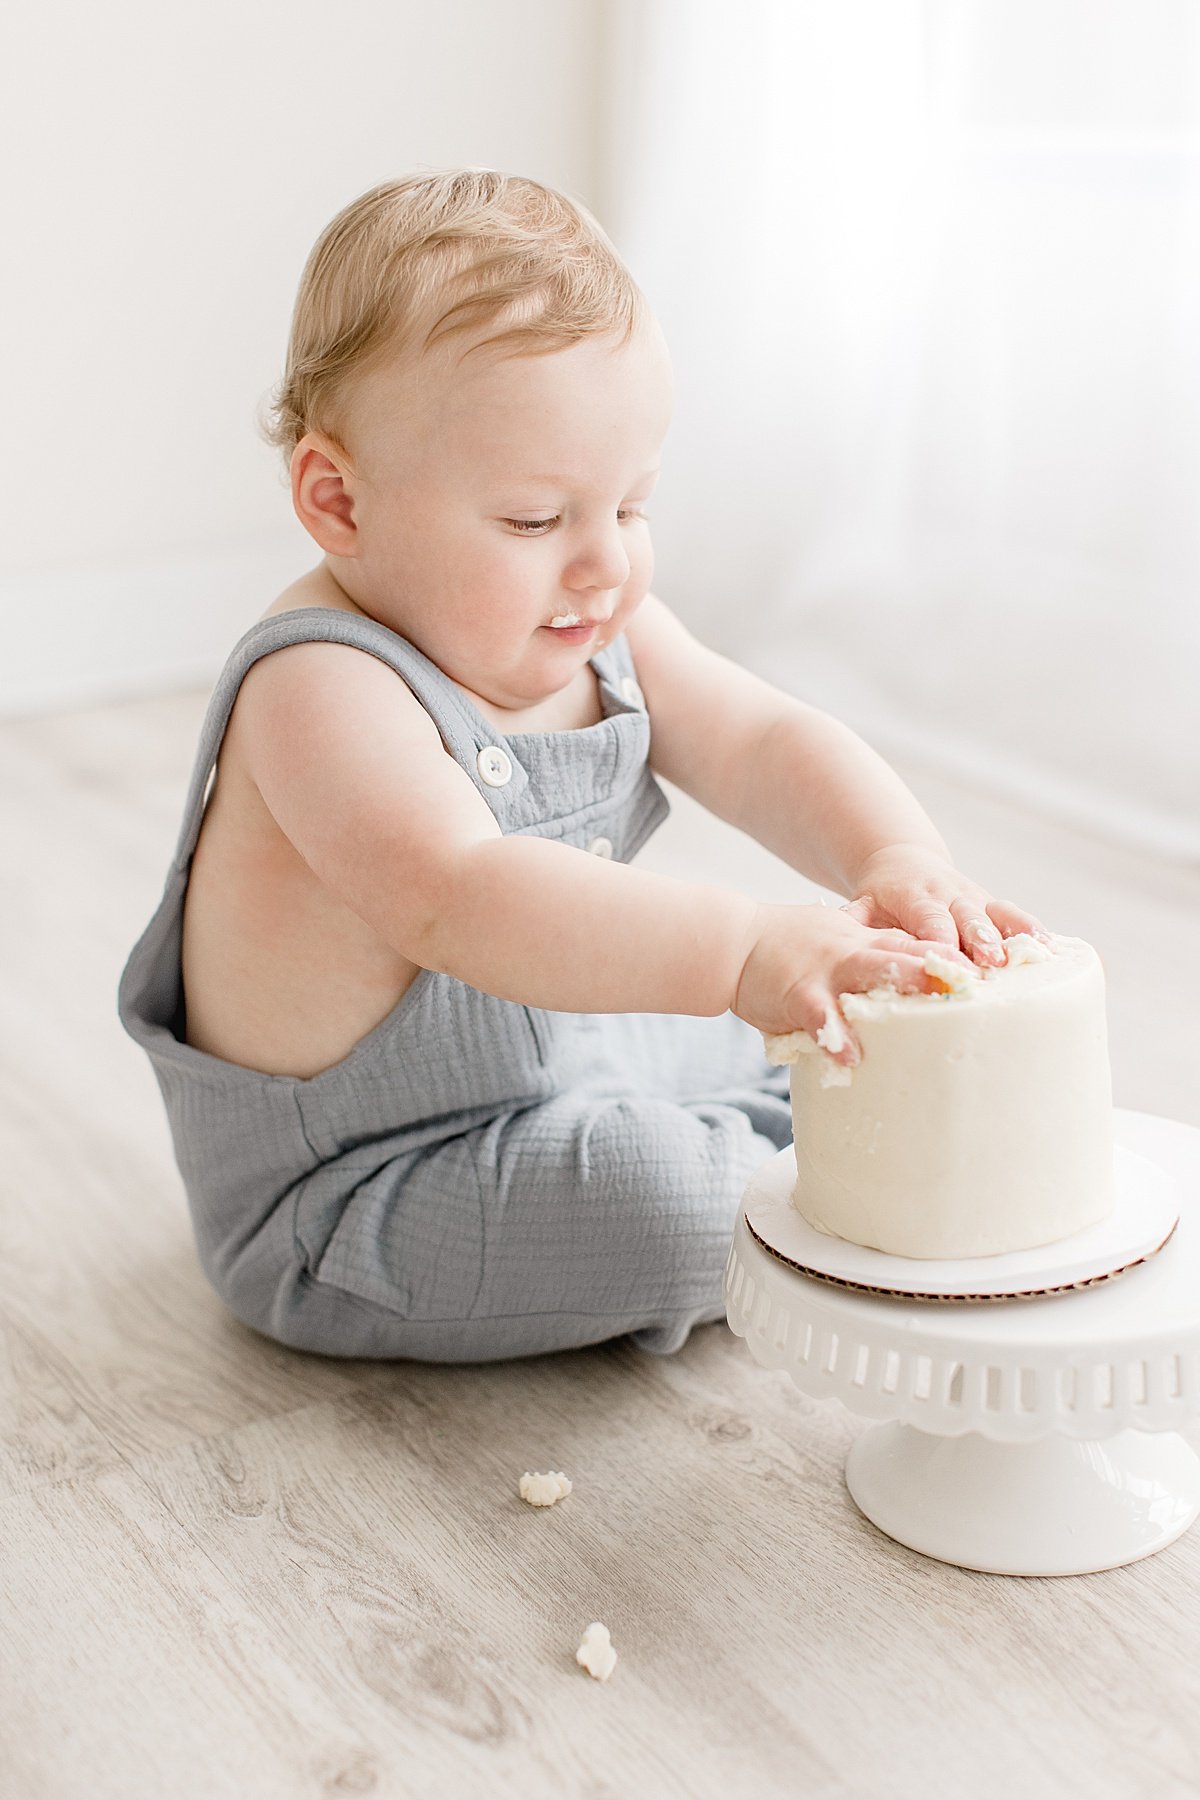 Baby Boy 1 Year Old eats smash cake during studio session with Ambre Williams | Newport Beach, California